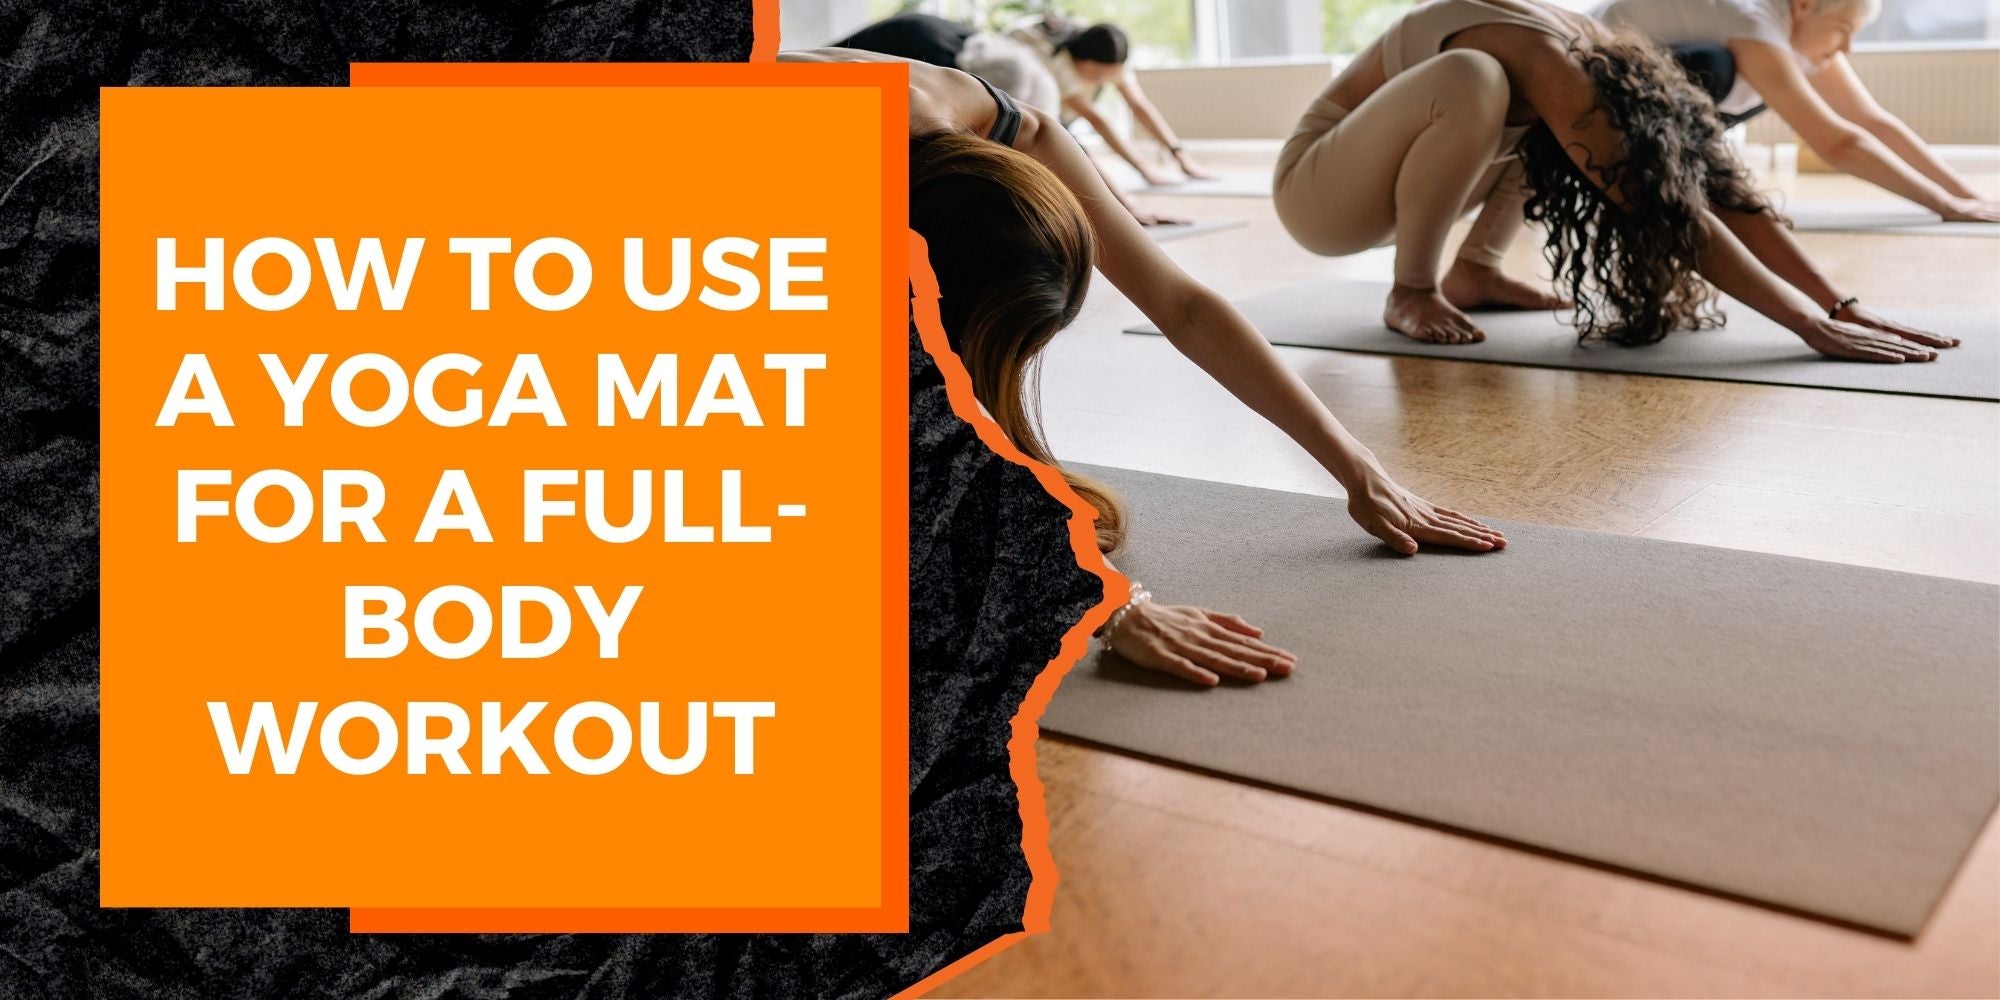 How to Use a Yoga Mat for a Full-Body Workout